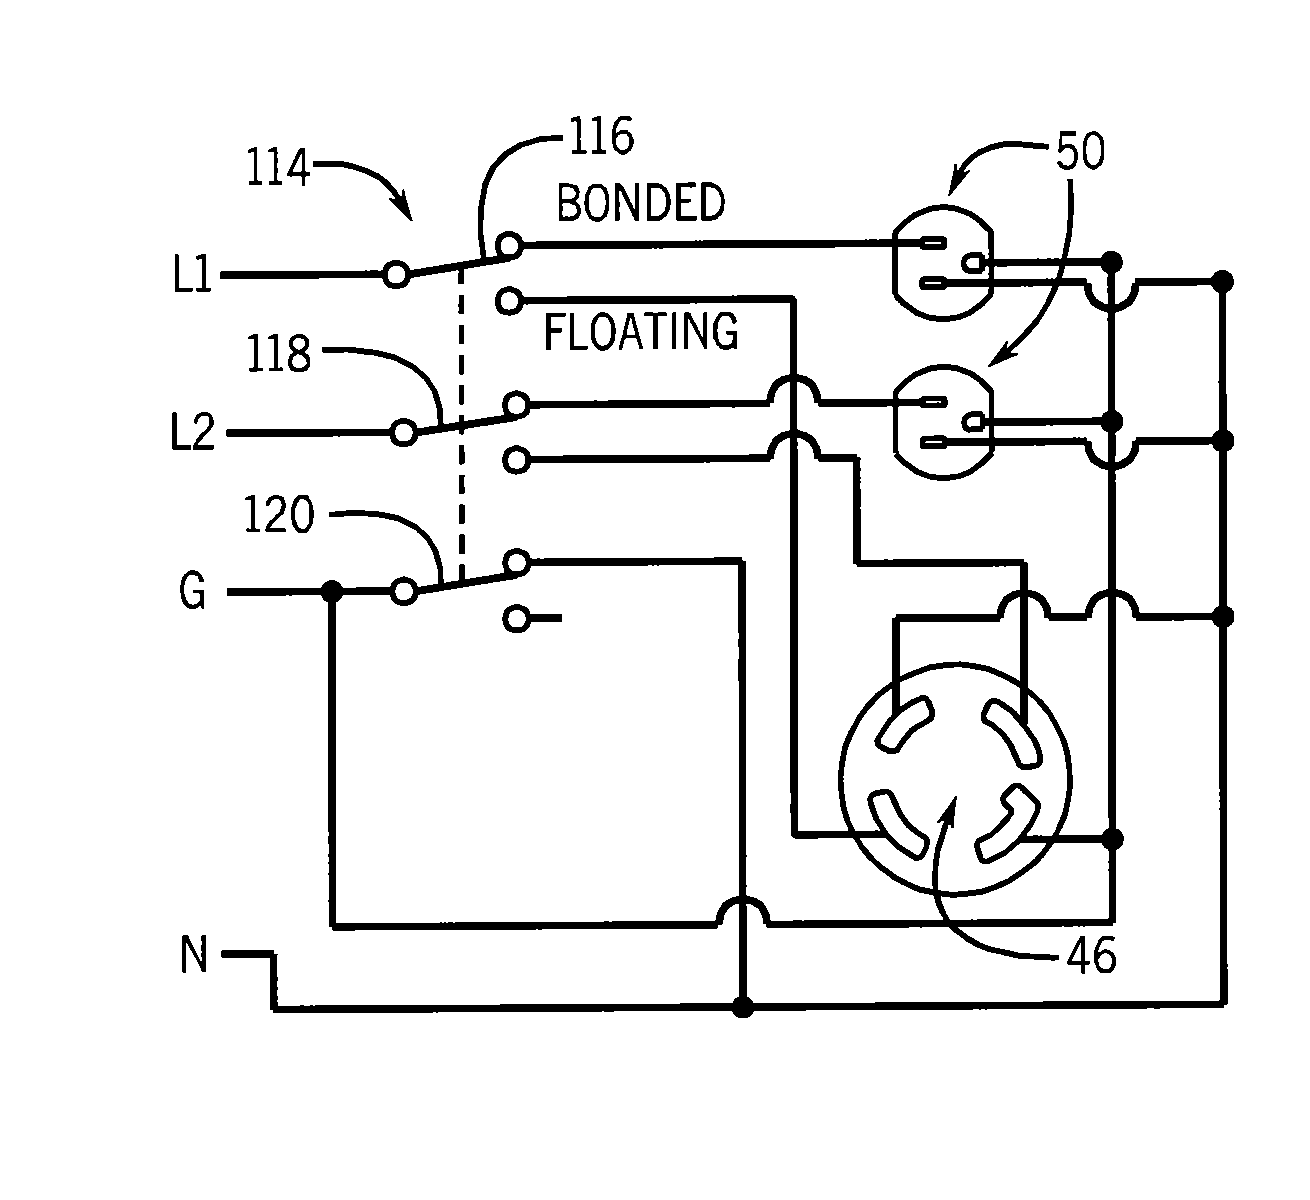 Interlock arrangement for controlling the neutral output of a portable generator